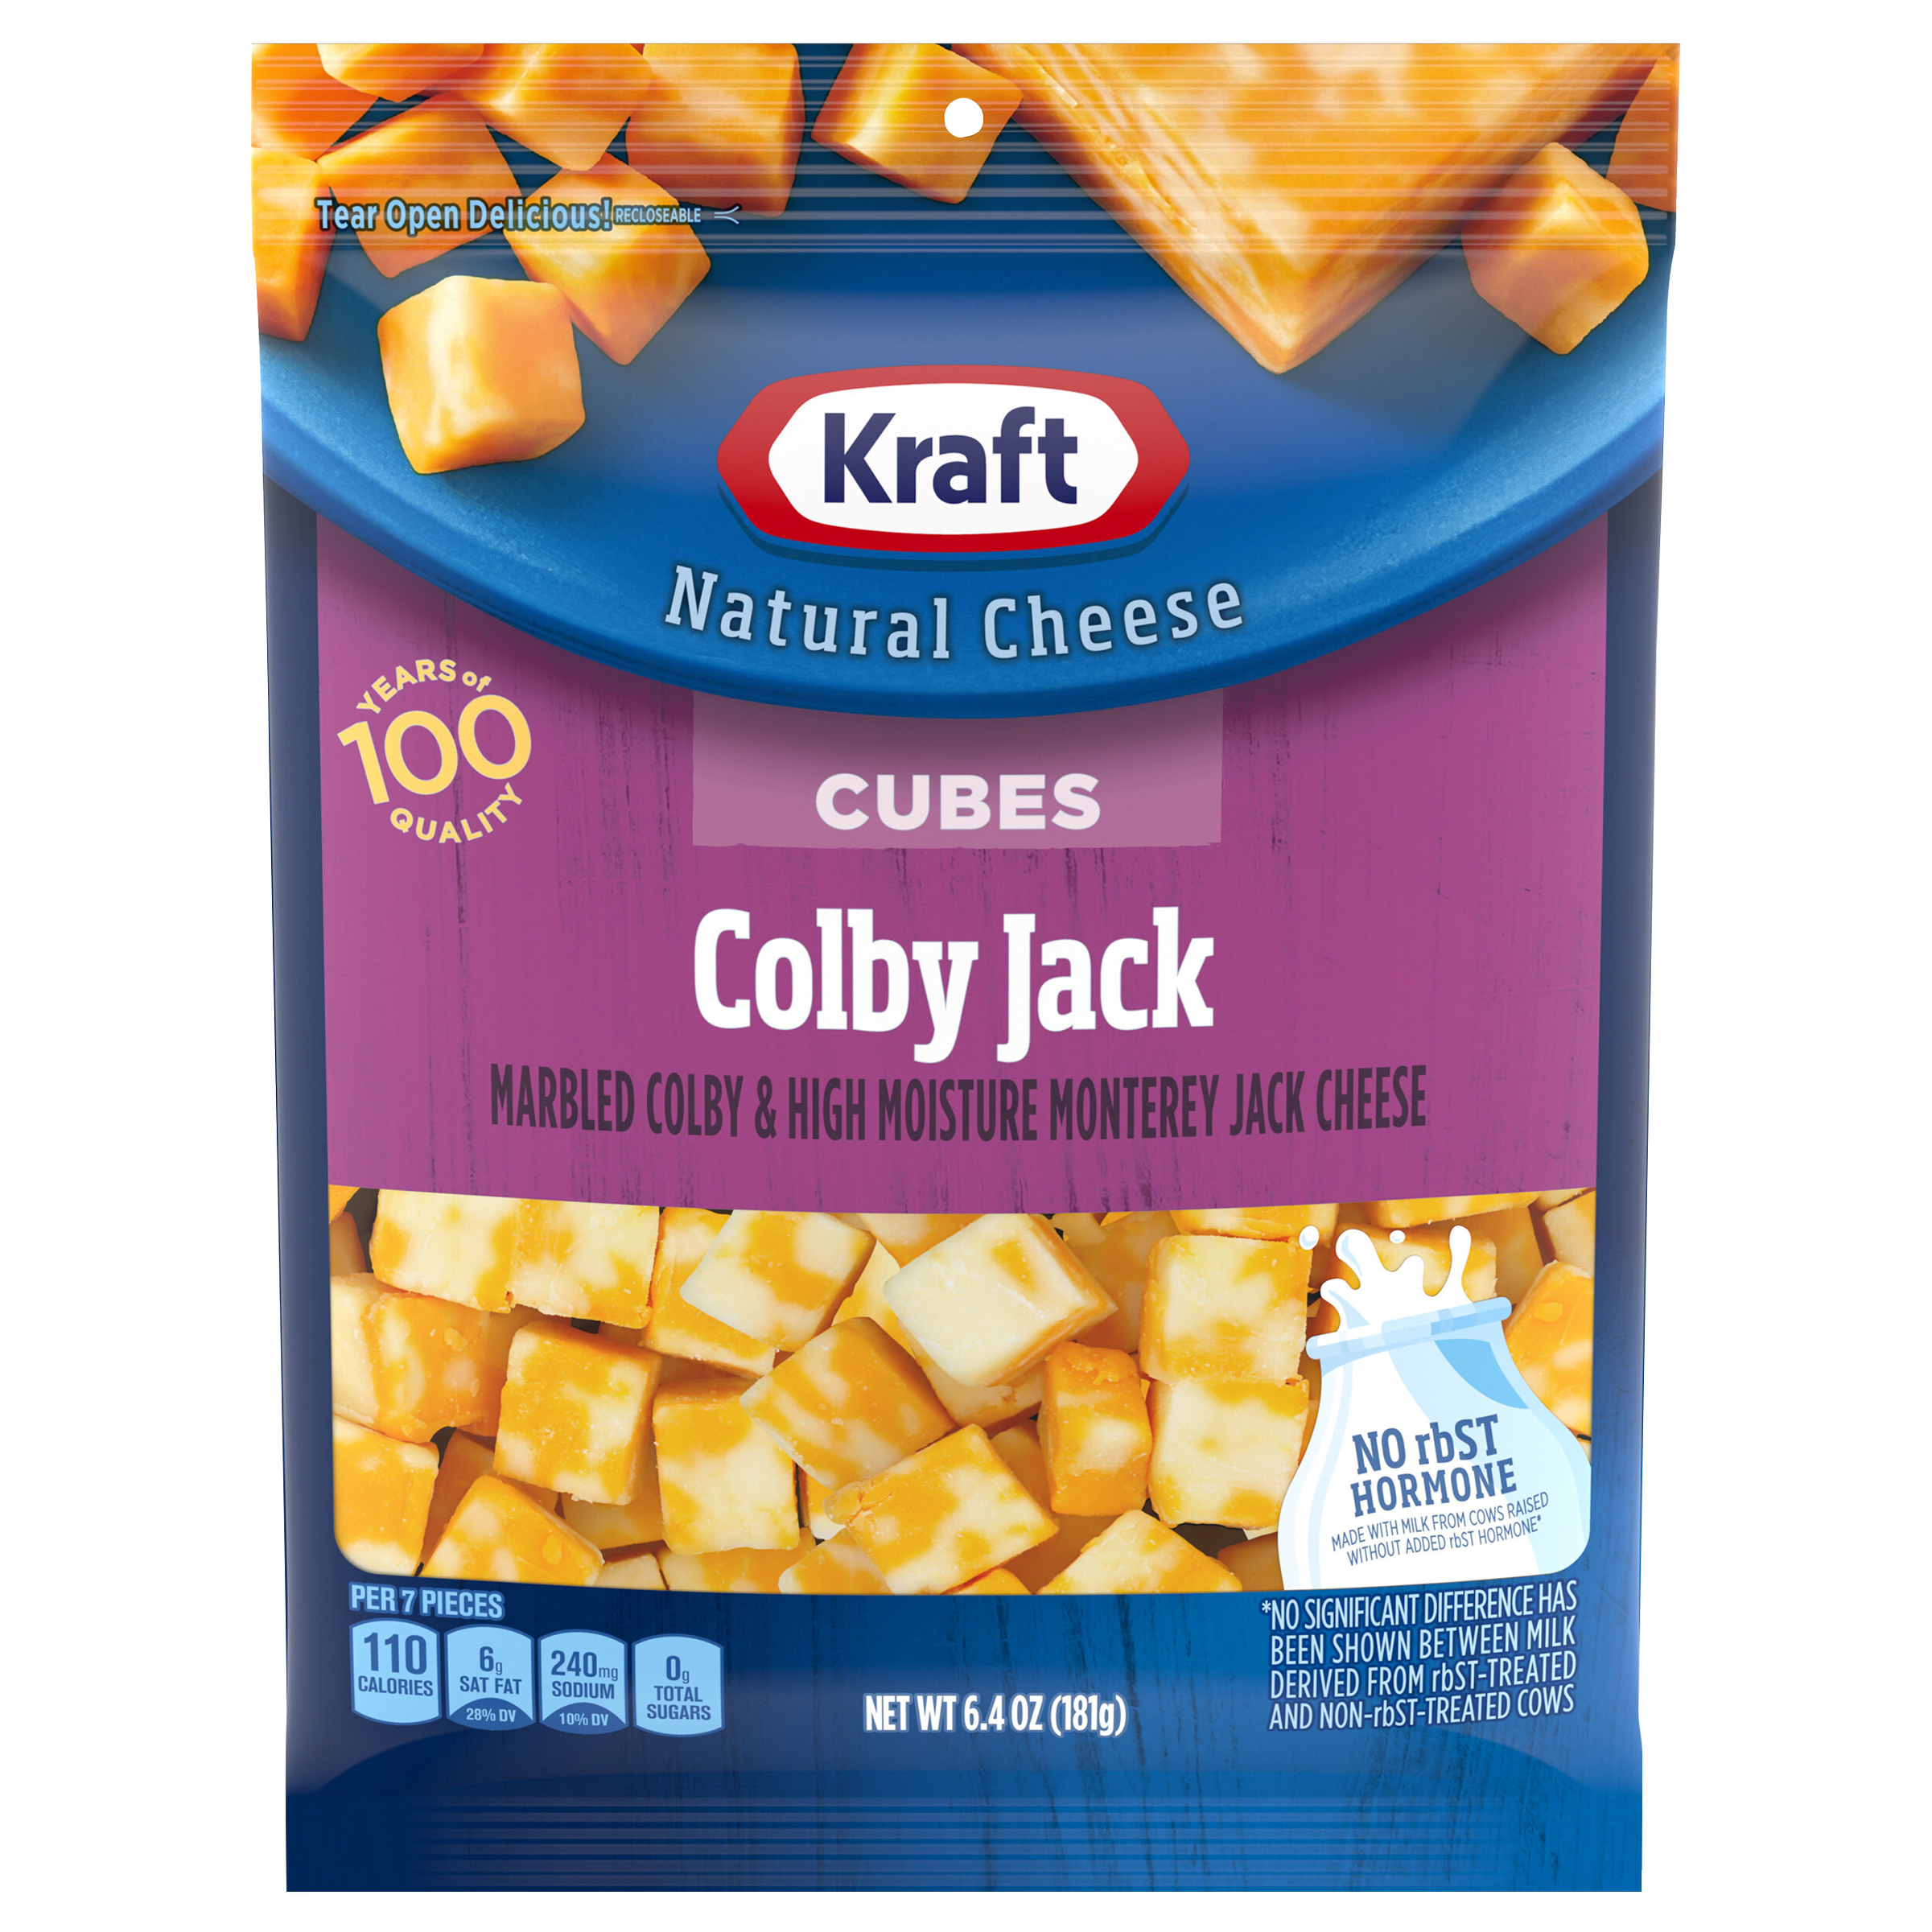 Cheese, Colby Jack, Cubes image